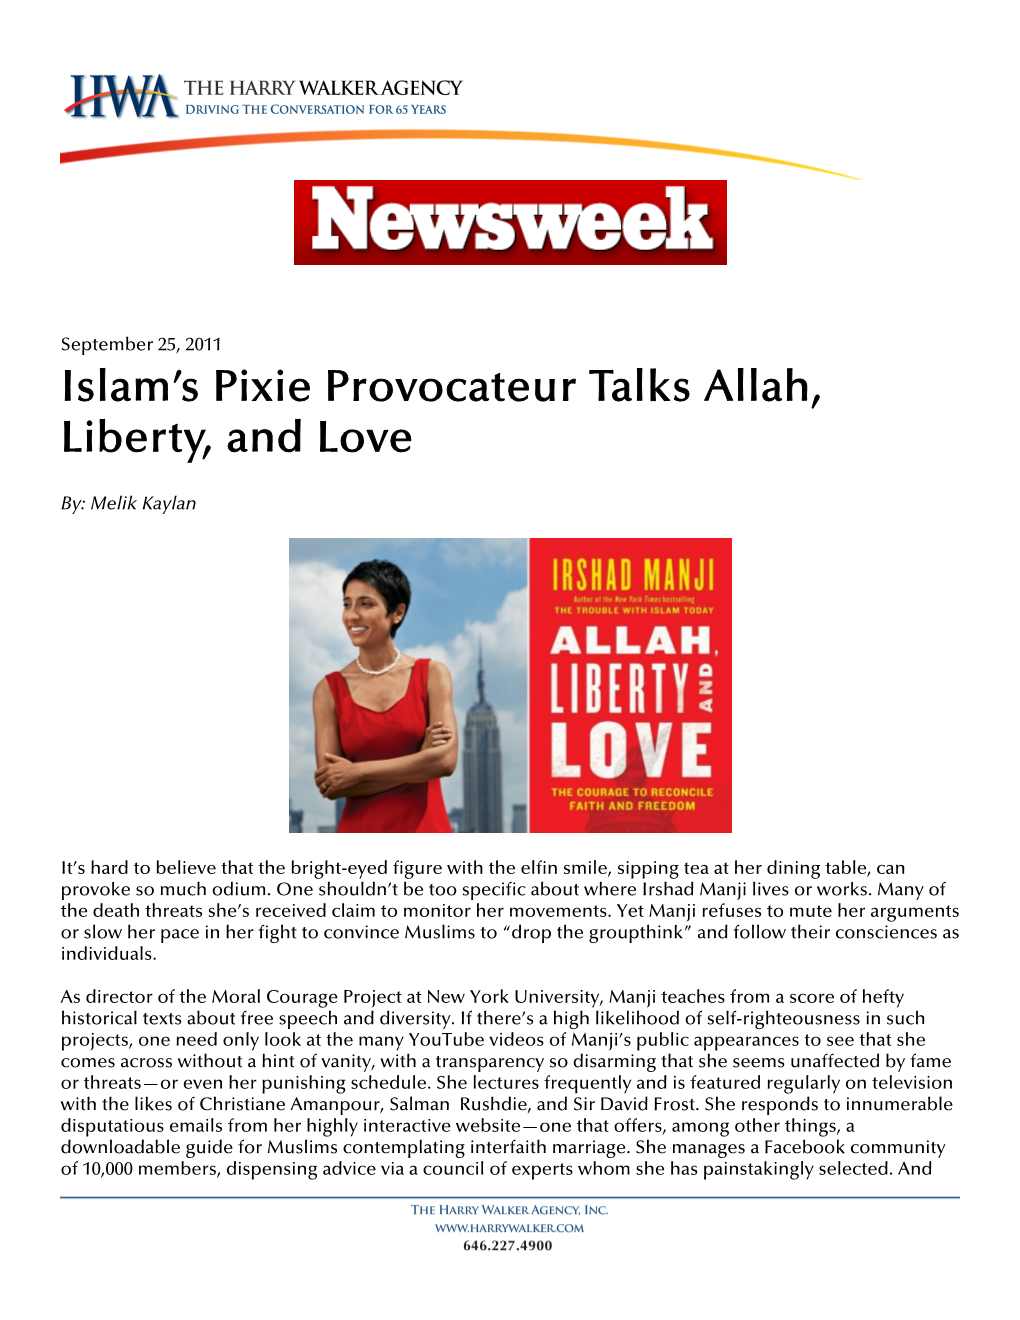 Islam's Pixie Provocateur Talks Allah, Liberty, and Love